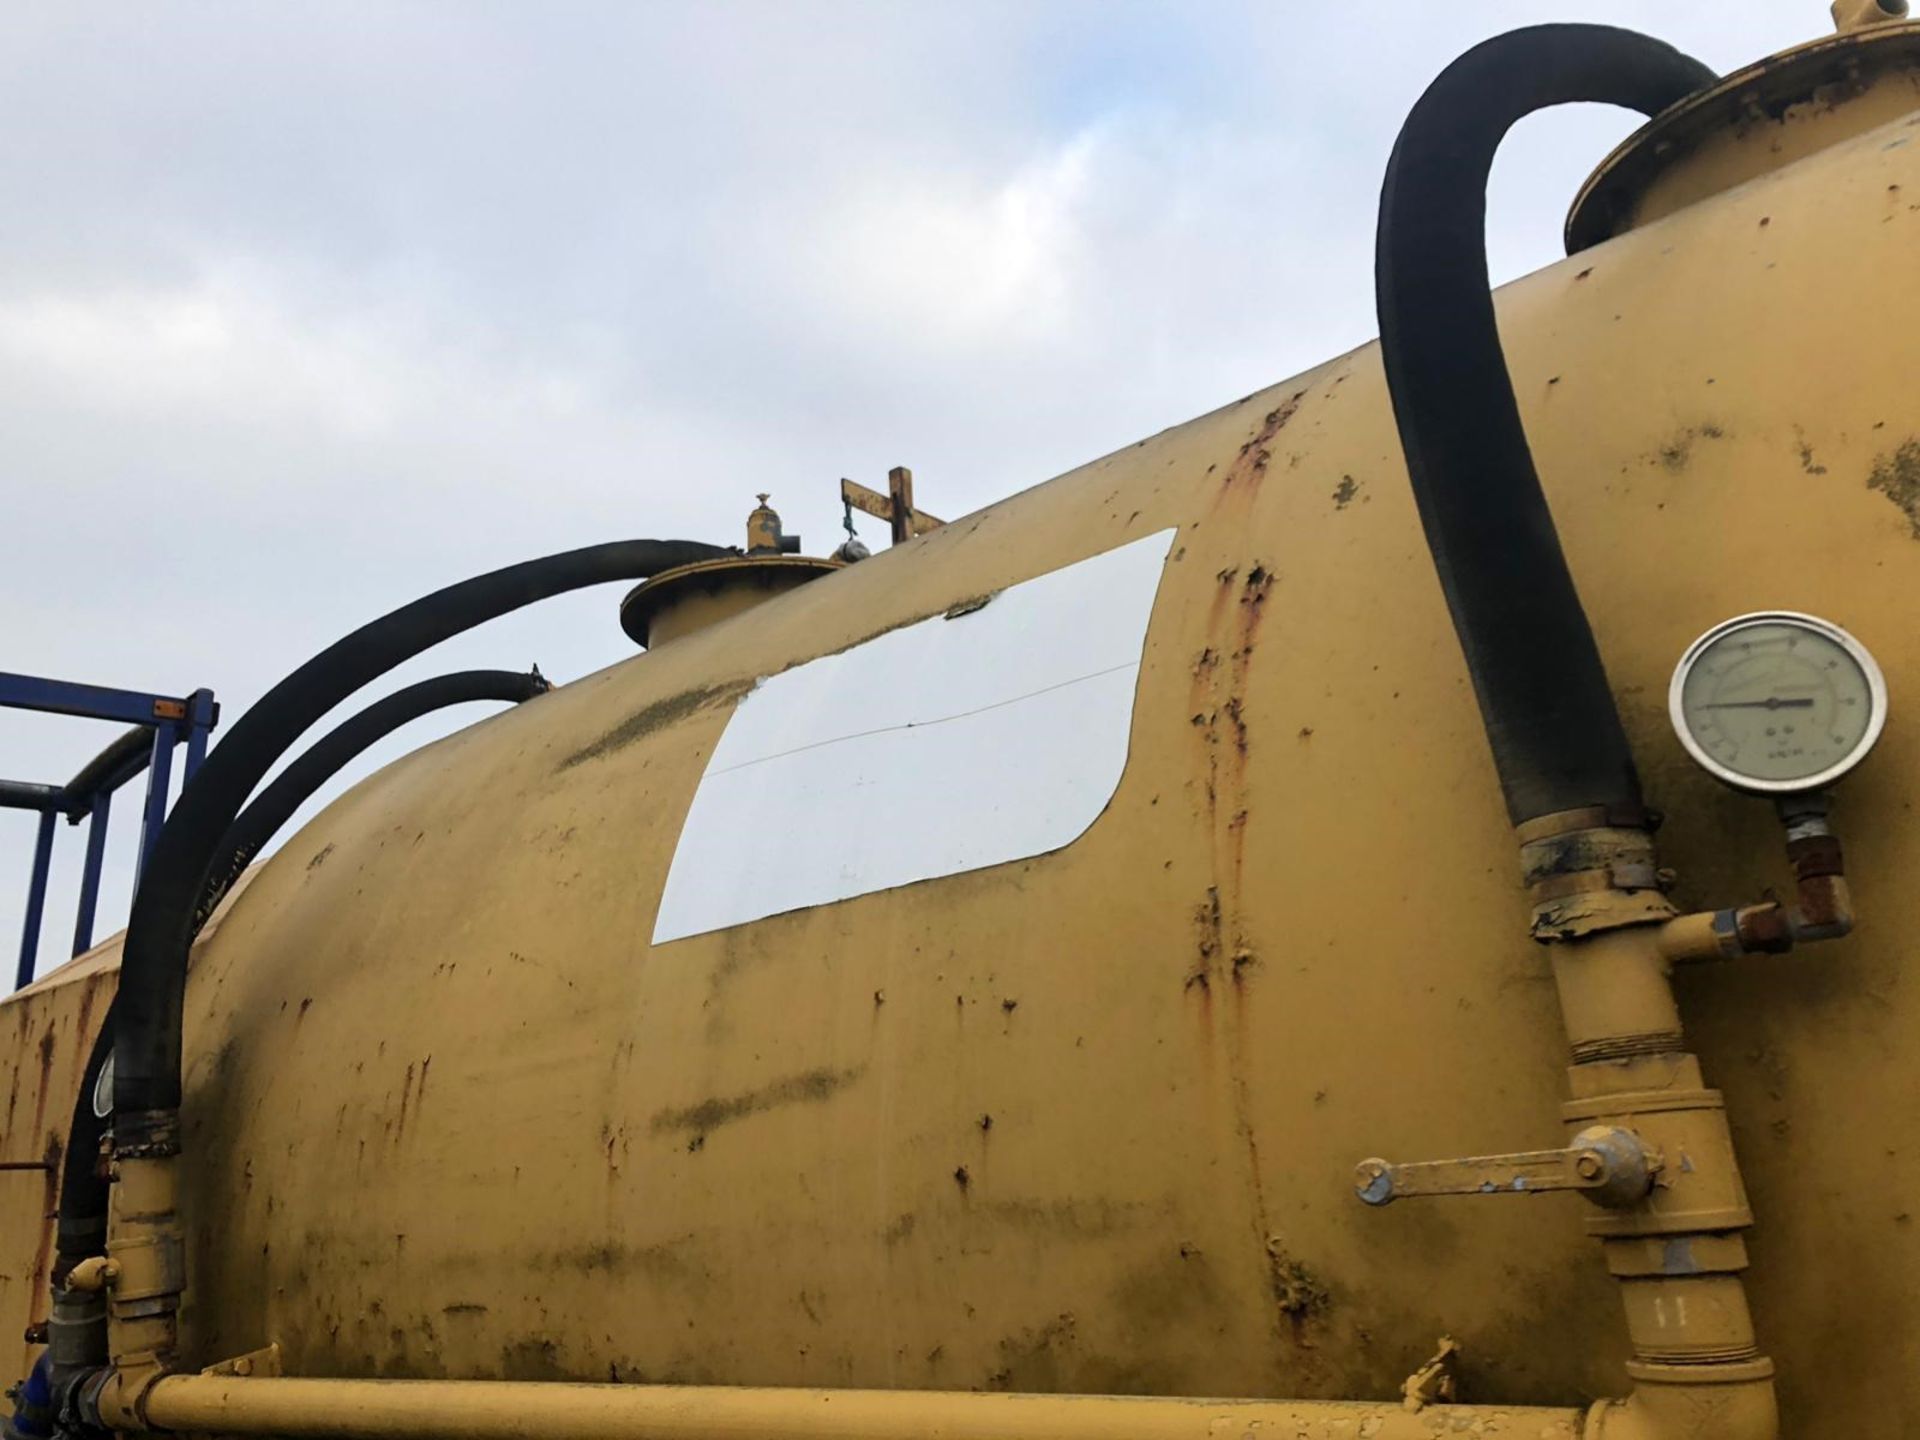 1989 TWIN AXLE TOW ABLE YELLOW OIL TANK, SERIAL NUMBER: VE 355 *PLUS VAT* - Image 10 of 10